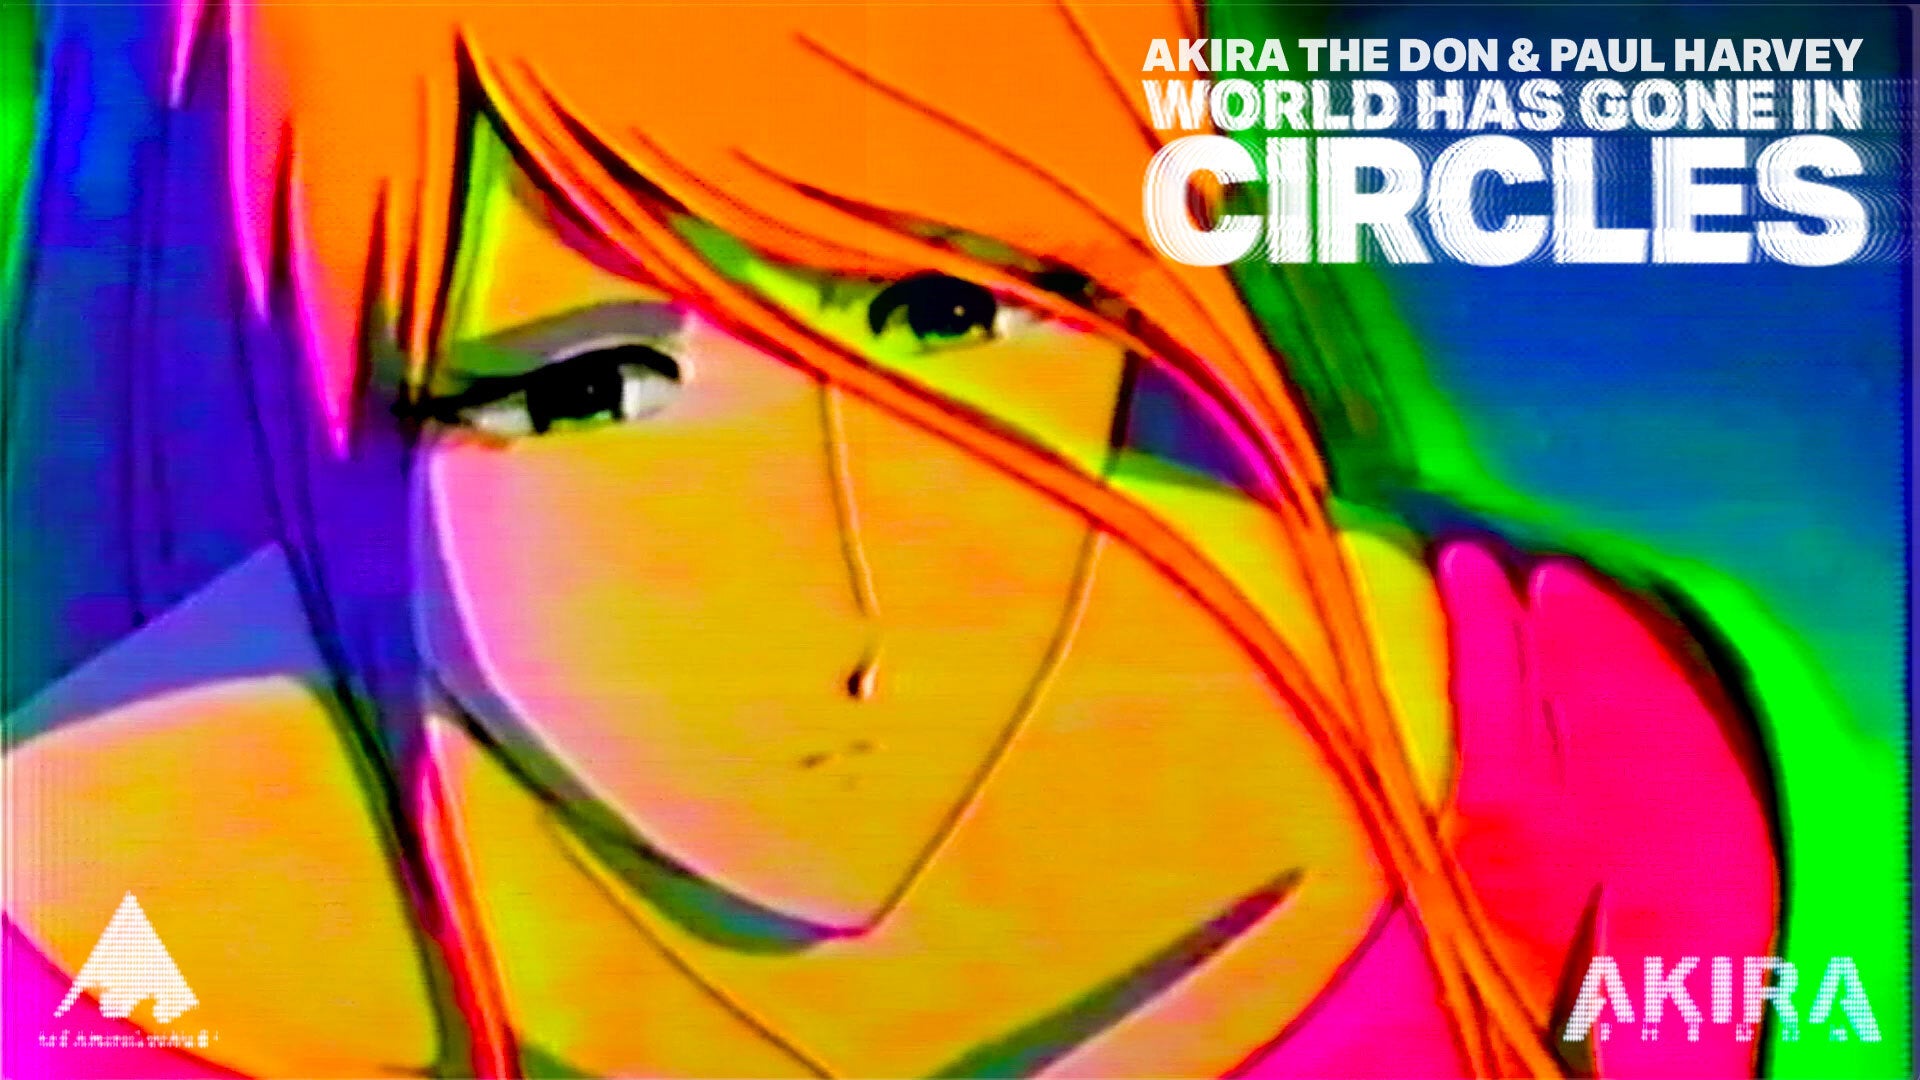 Akira The Don & Paul Harvey - WORLD HAS GONE IN CIRCLES | Music Video